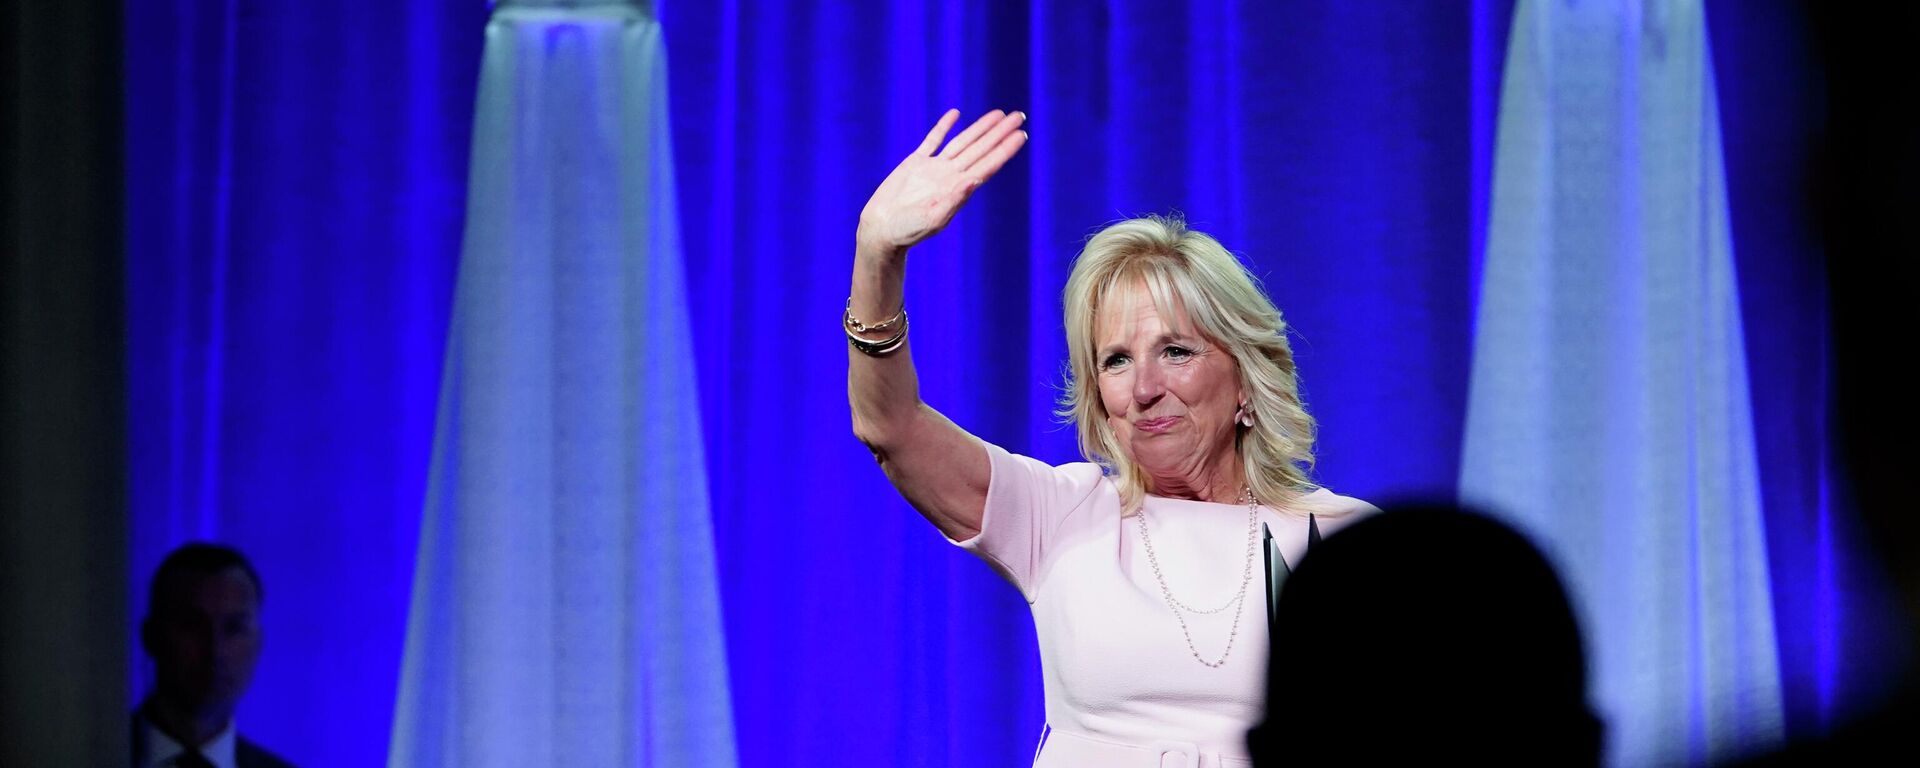 First lady Jill Biden waves to the audience after speaking at the 125th Anniversary Convention of the National Parent Teacher Association (PTA) in National Harbor, Md., Friday, June 17, 2022. - Sputnik International, 1920, 24.08.2022